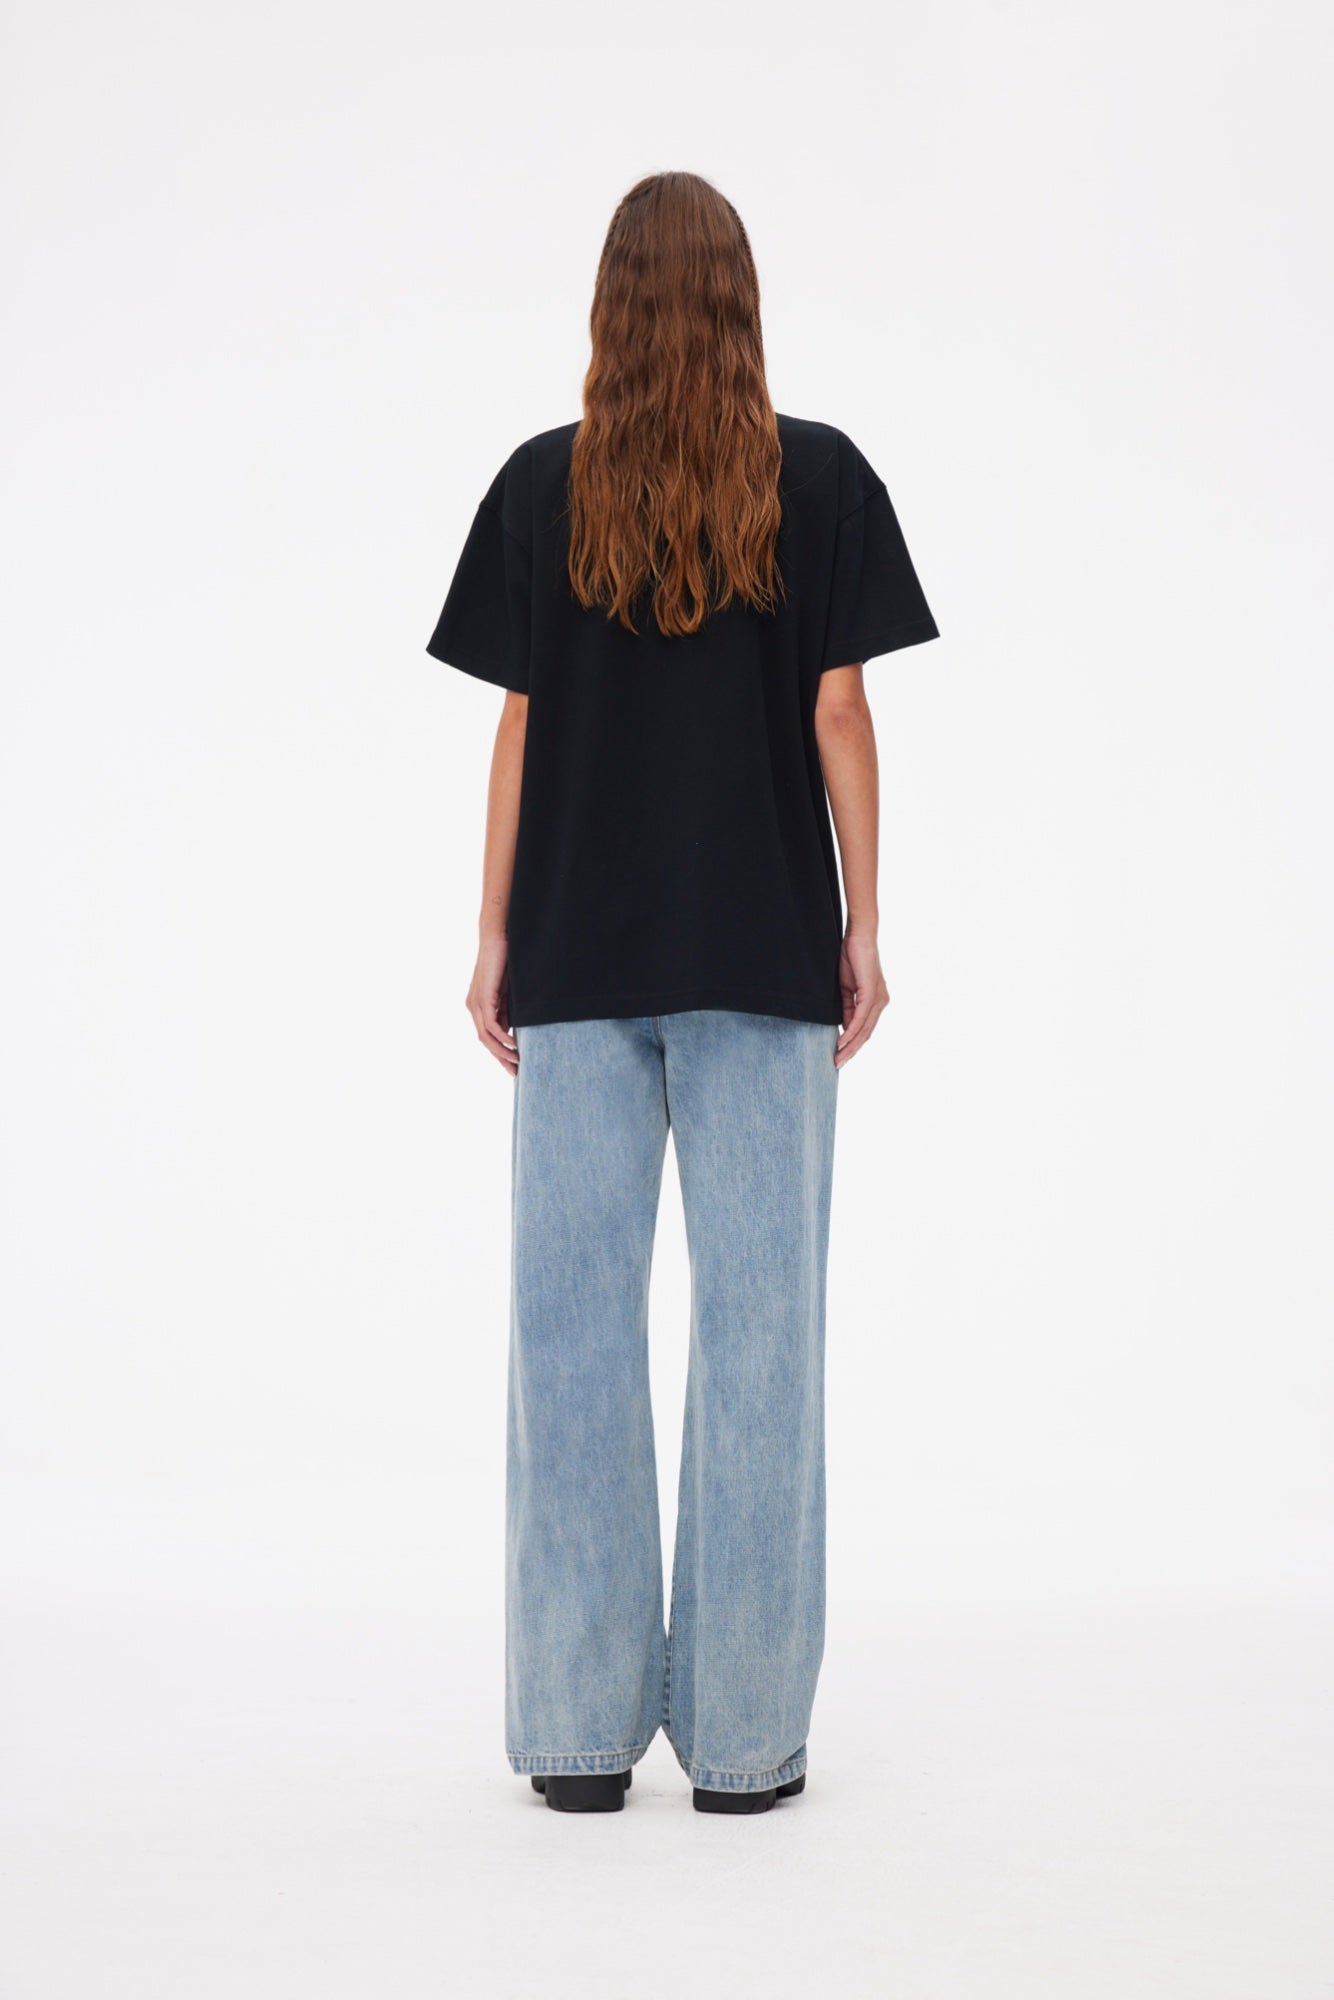 ANN ANDELMAN Jelly Letter T-shirt Black | MADA IN CHINA